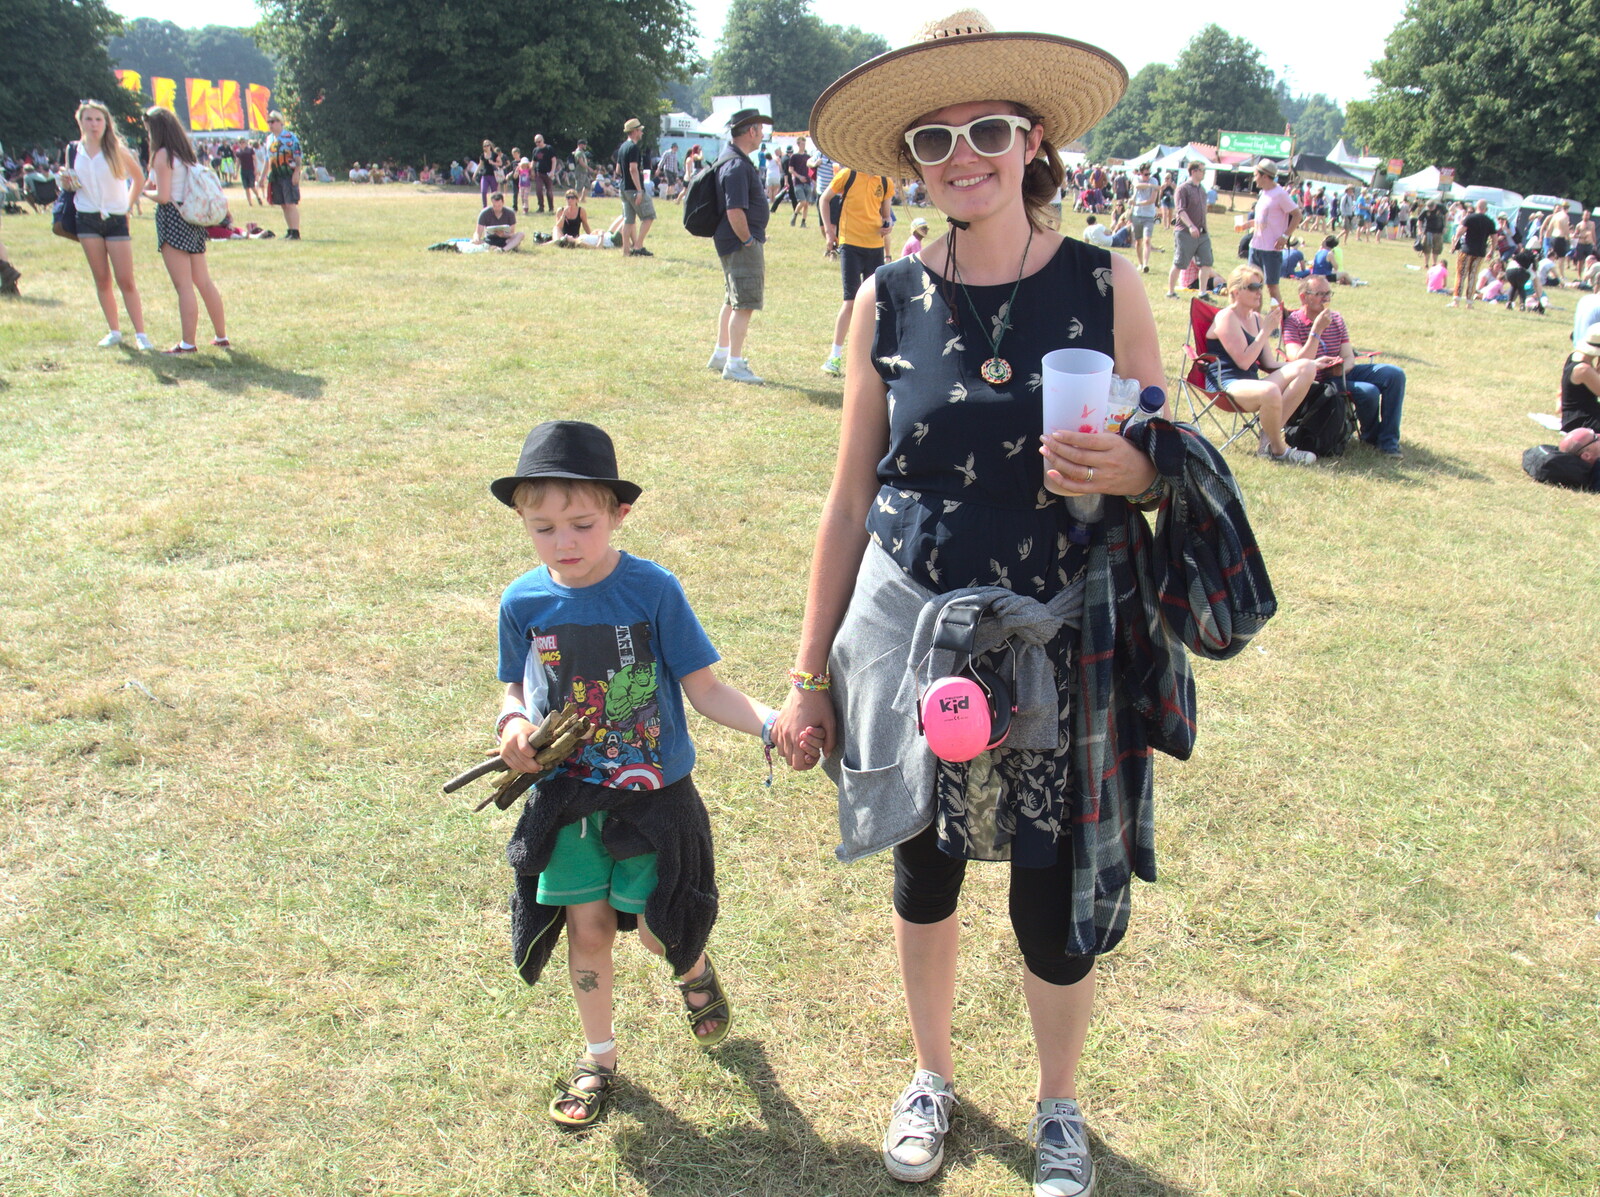 Fred (with new hat) and Isobel from Latitude Festival, Henham Park, Southwold, Suffolk - 17th July 2014